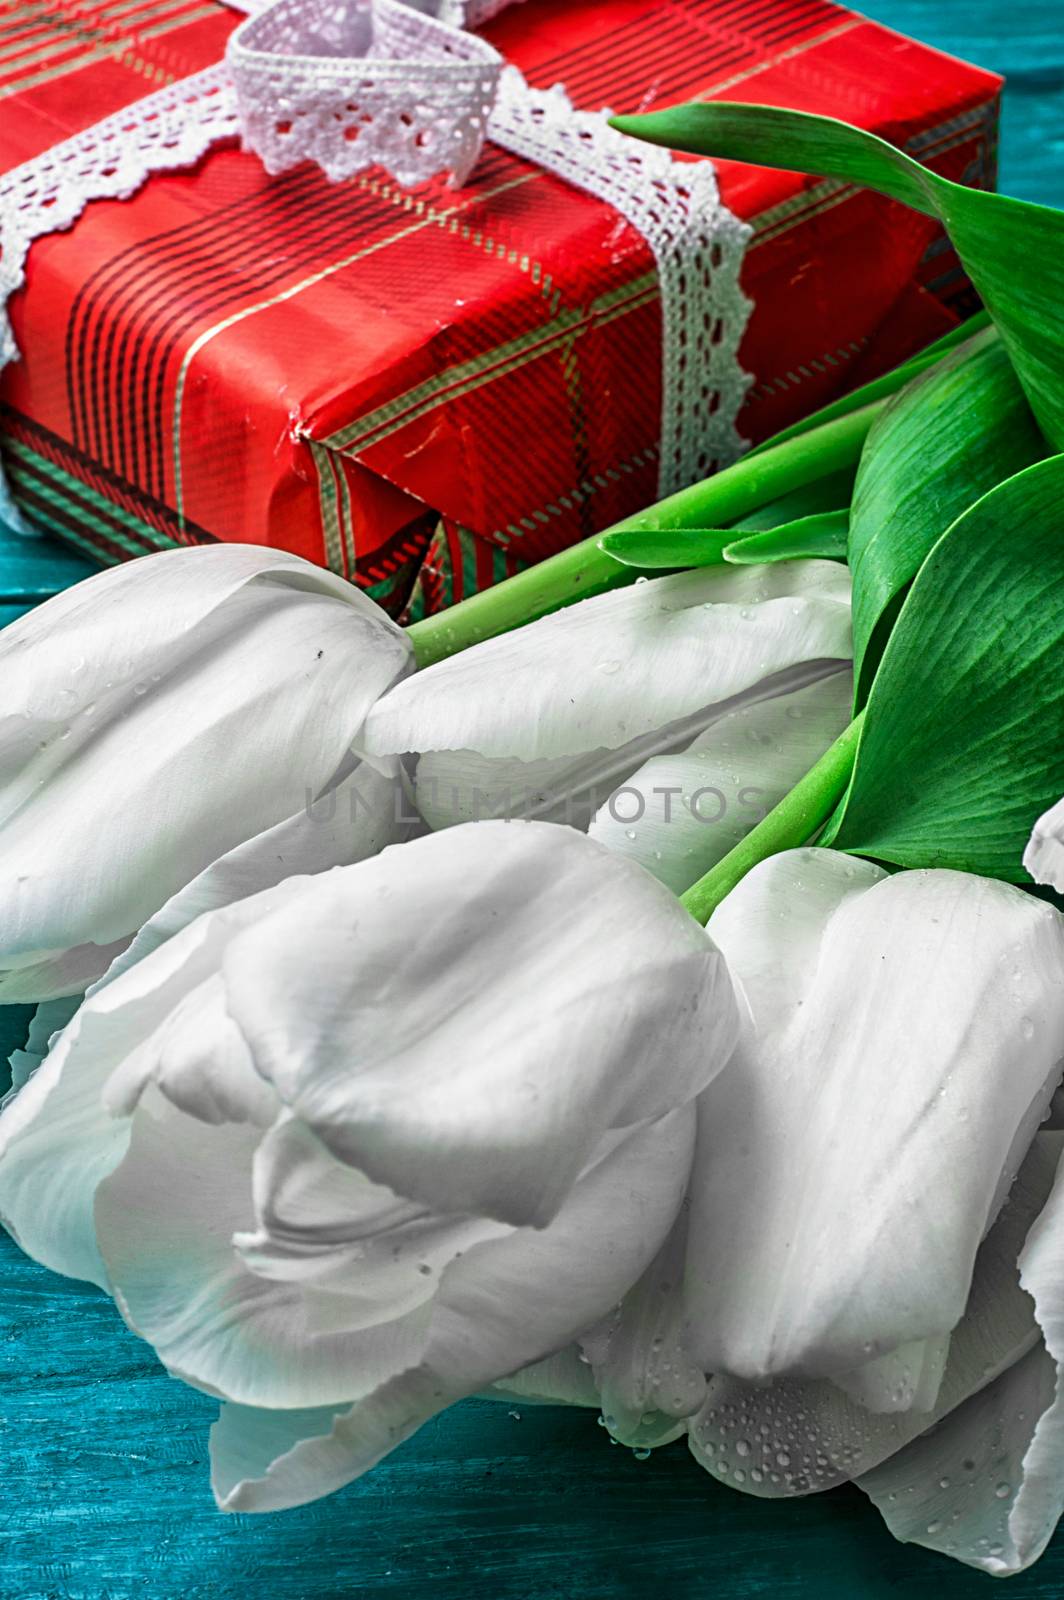 Packed gift box amid a bouquet of white tulips